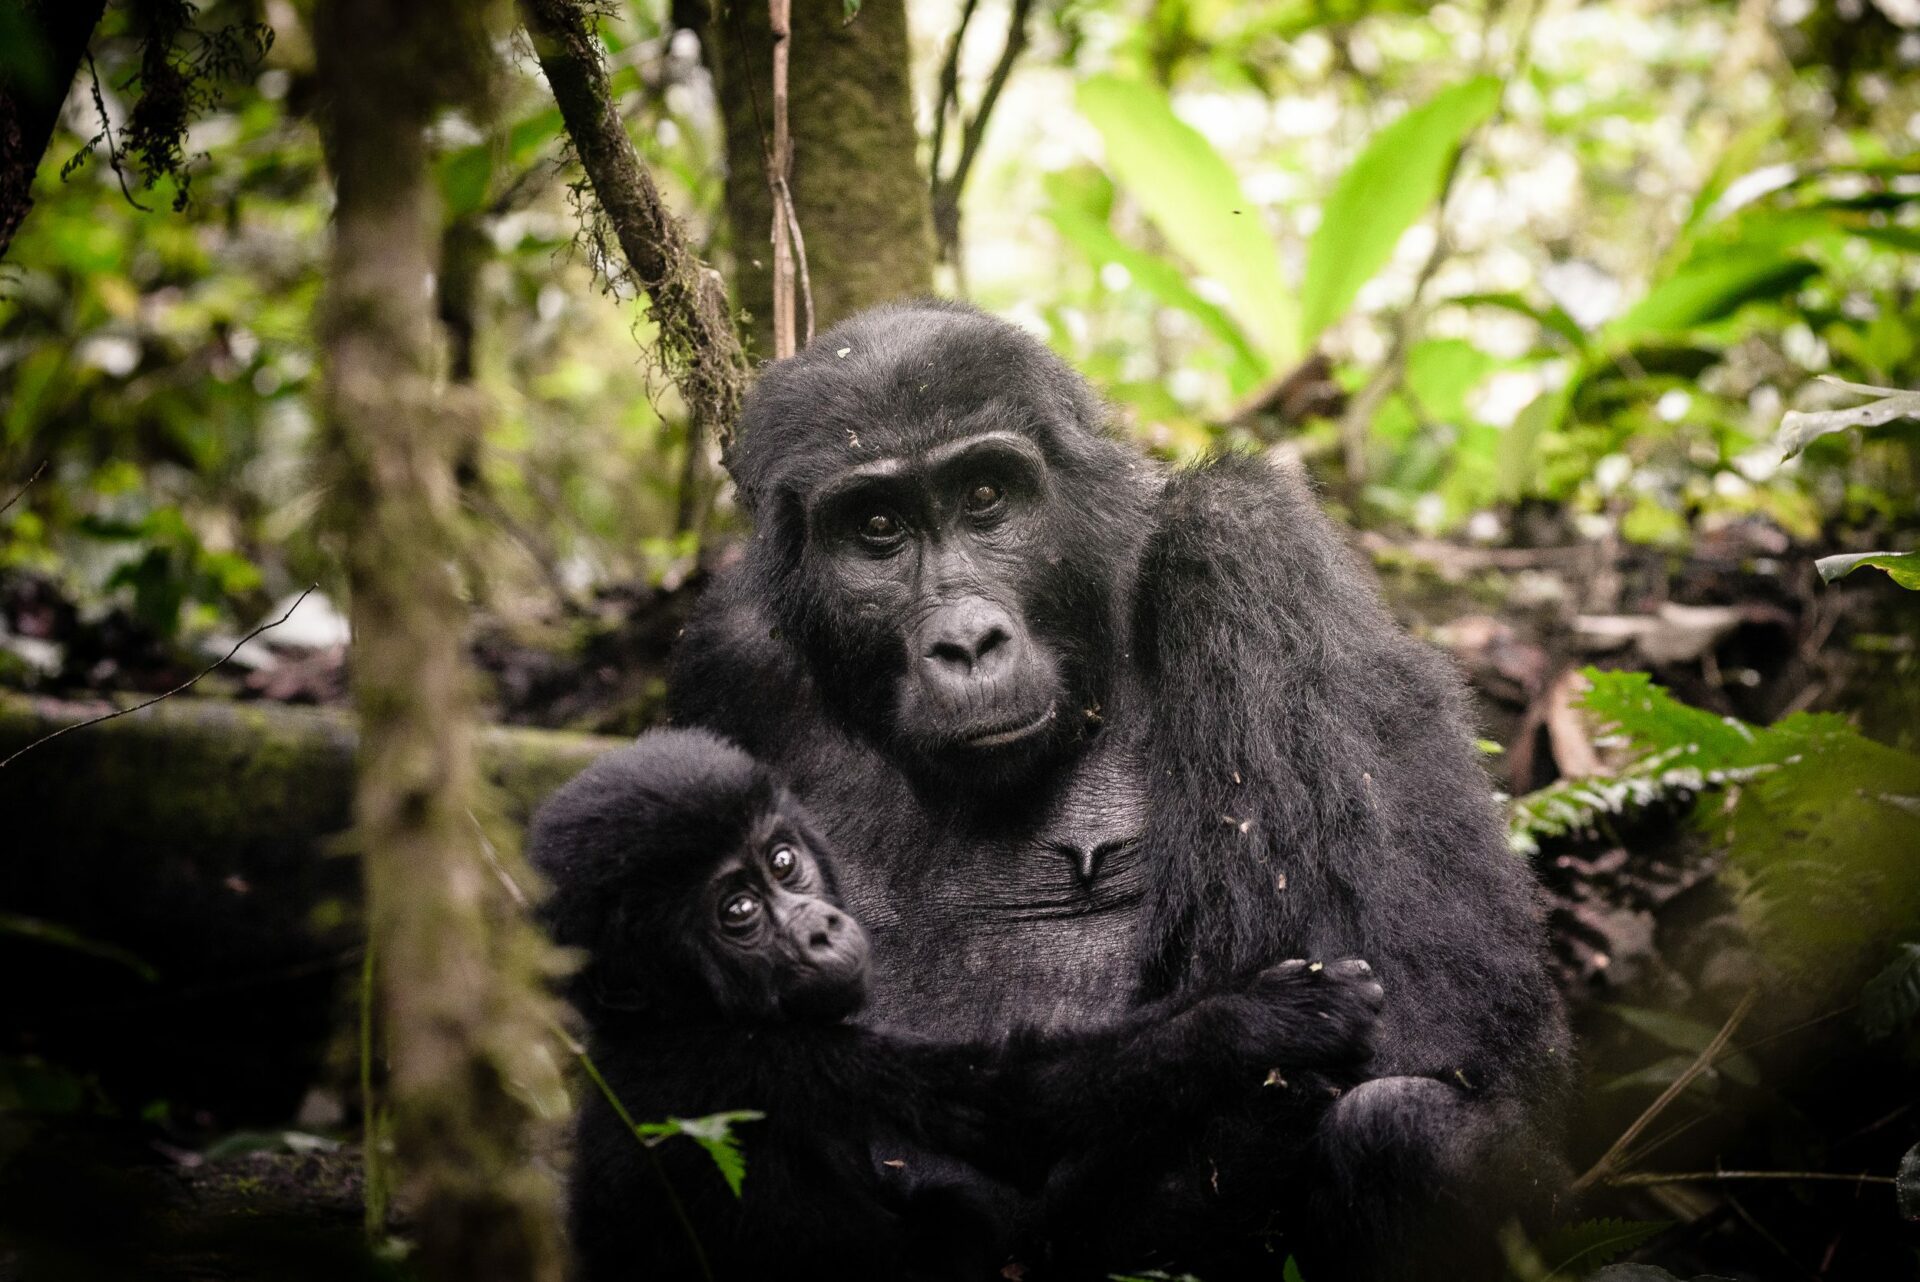 A baby gorilla clutches to its mother in the rainforests of Uganda.